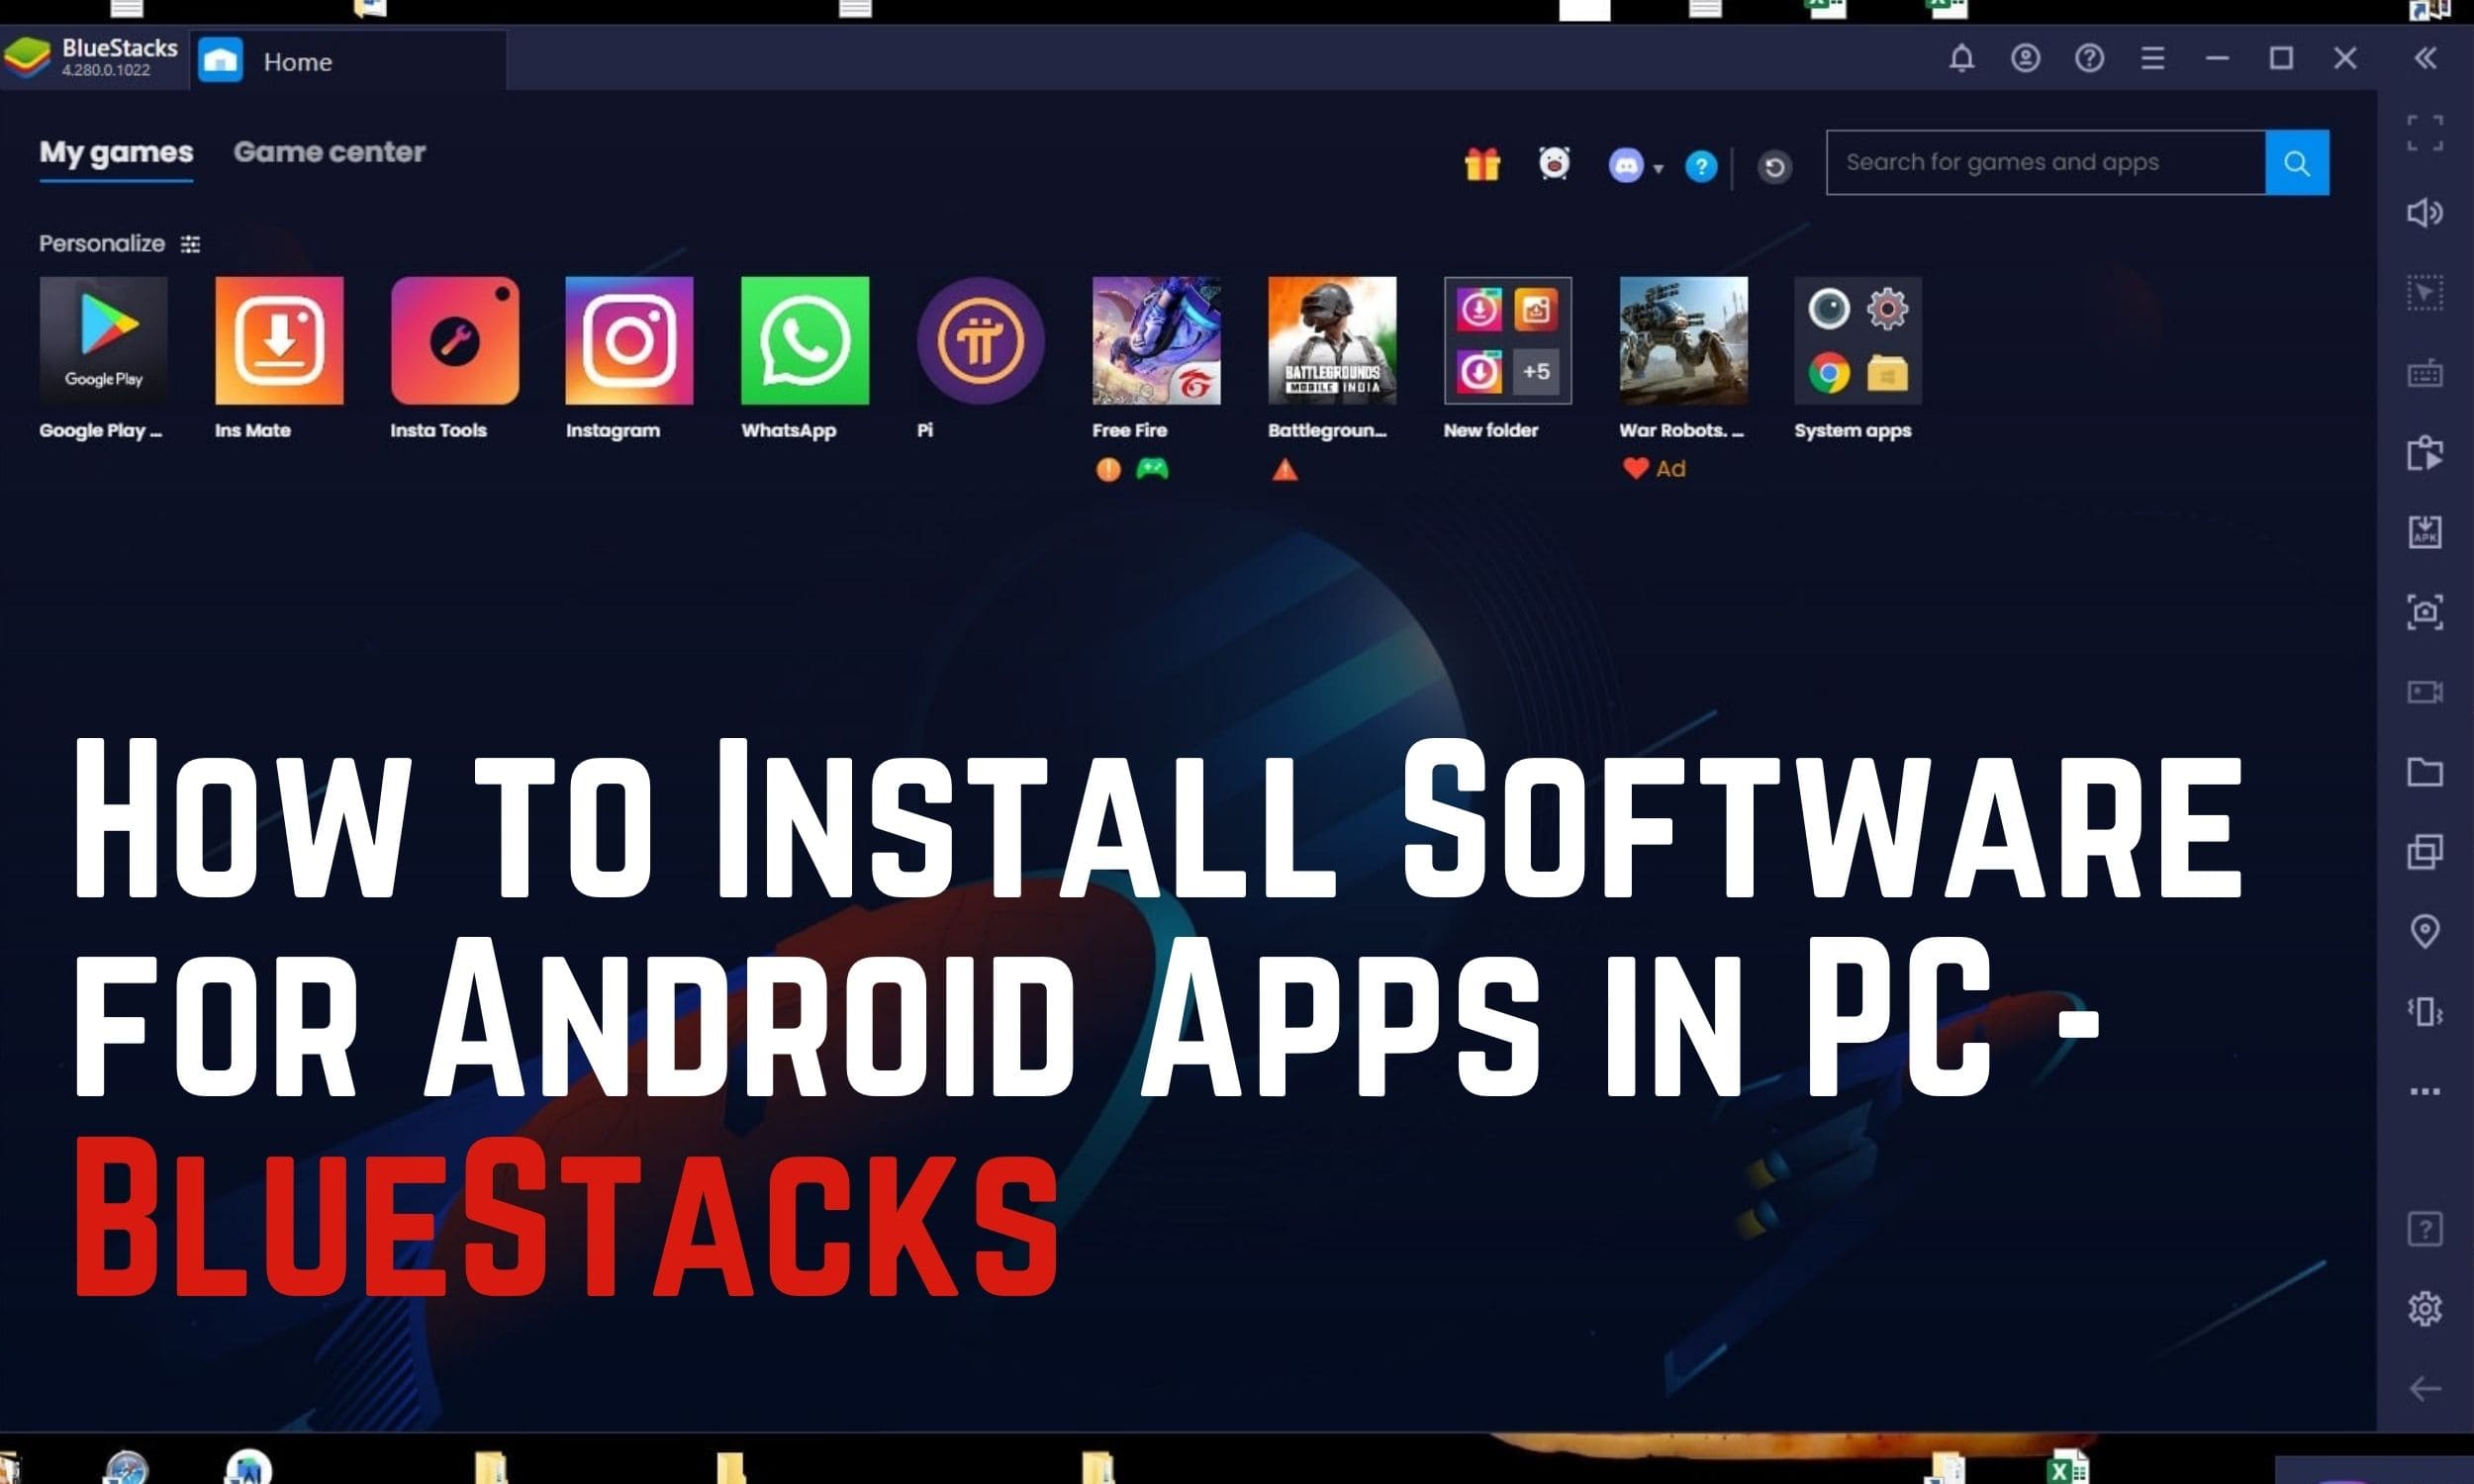 10 windows bluestacks for How to